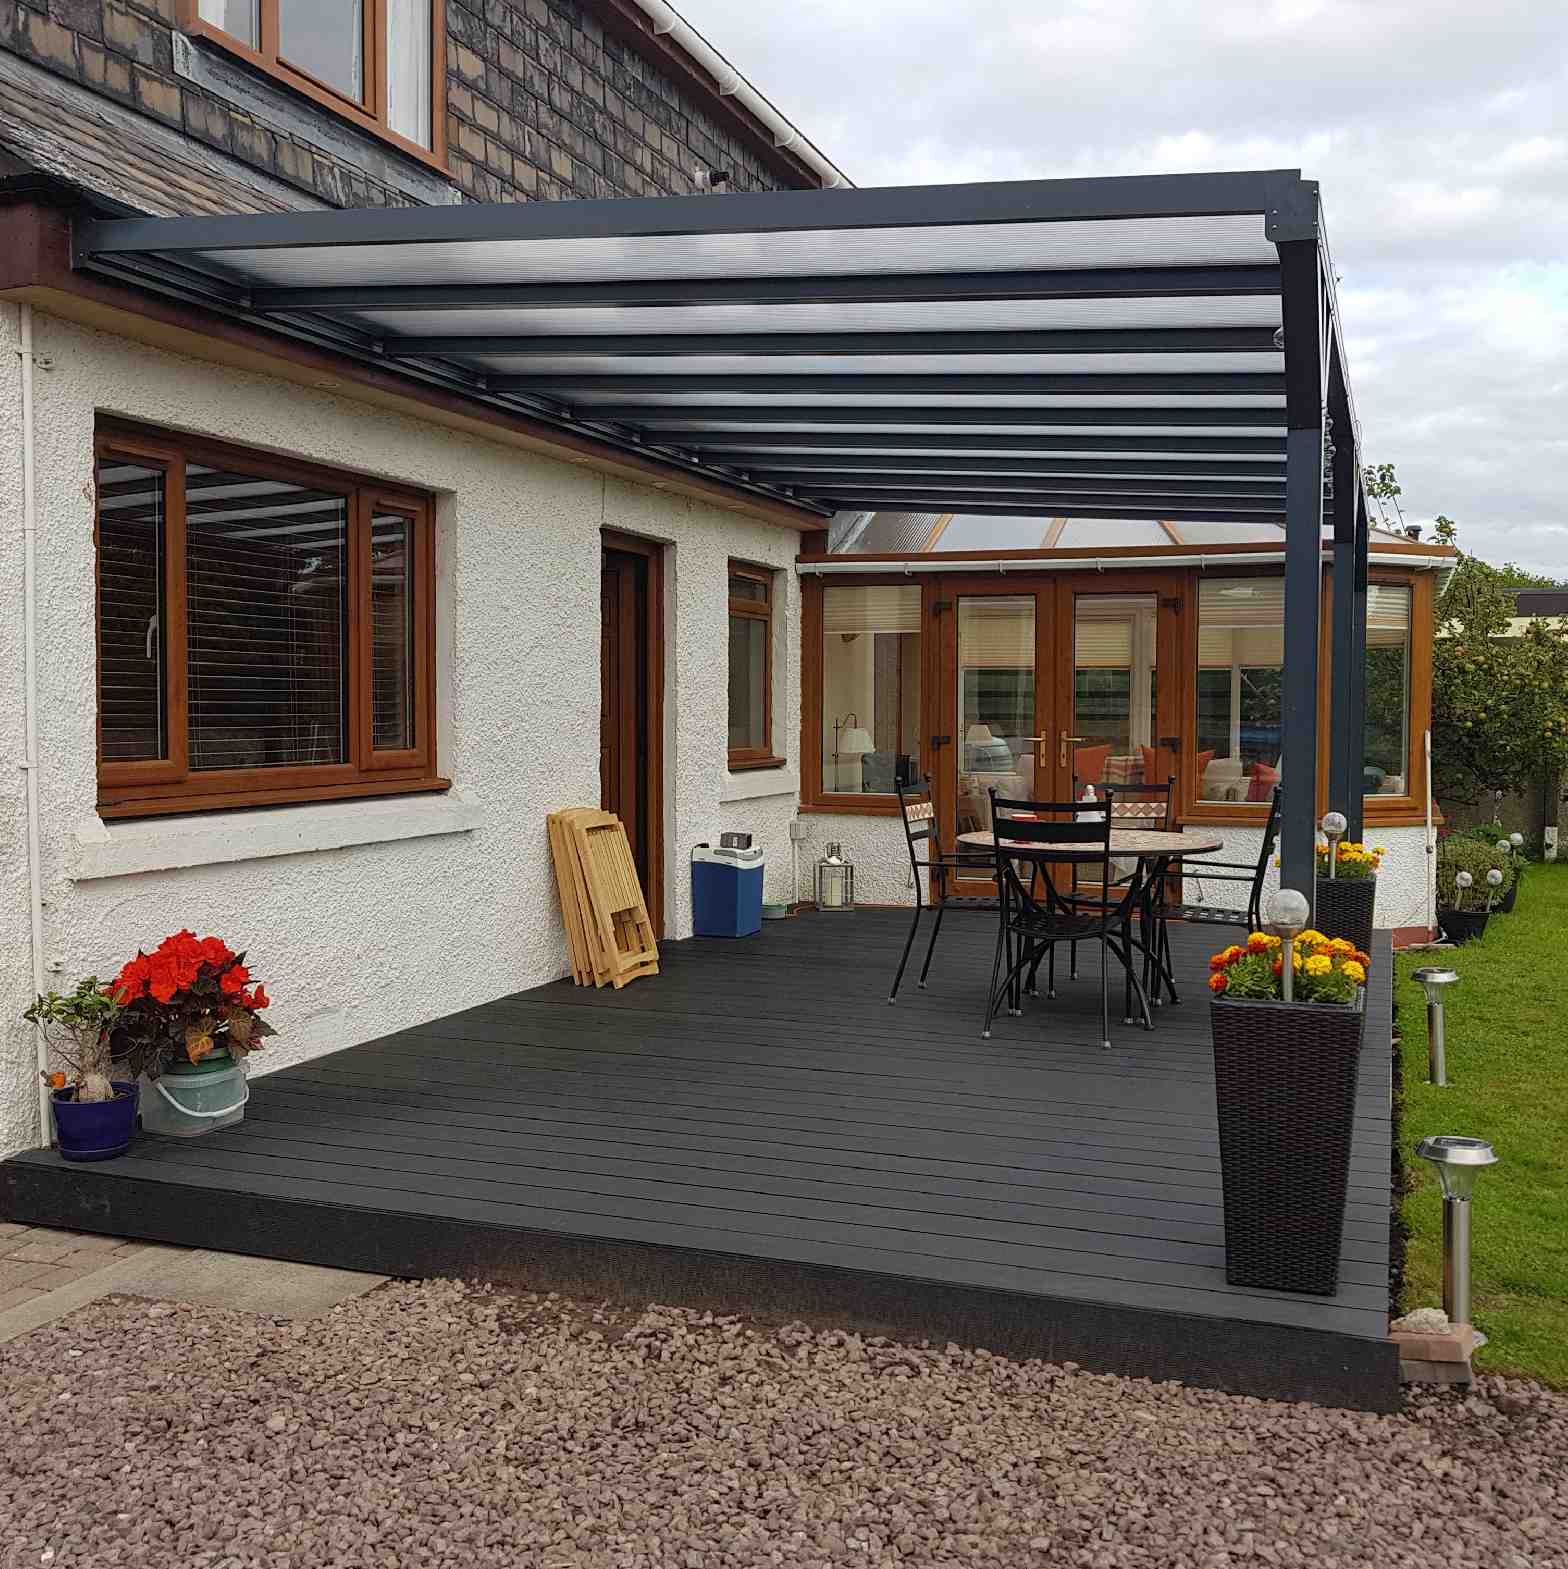 Buy Omega Verandah, Anthracite Grey, 16mm Polycarbonate Glazing - 12.0m (W) x 2.5m (P), (5) Supporting Posts online today